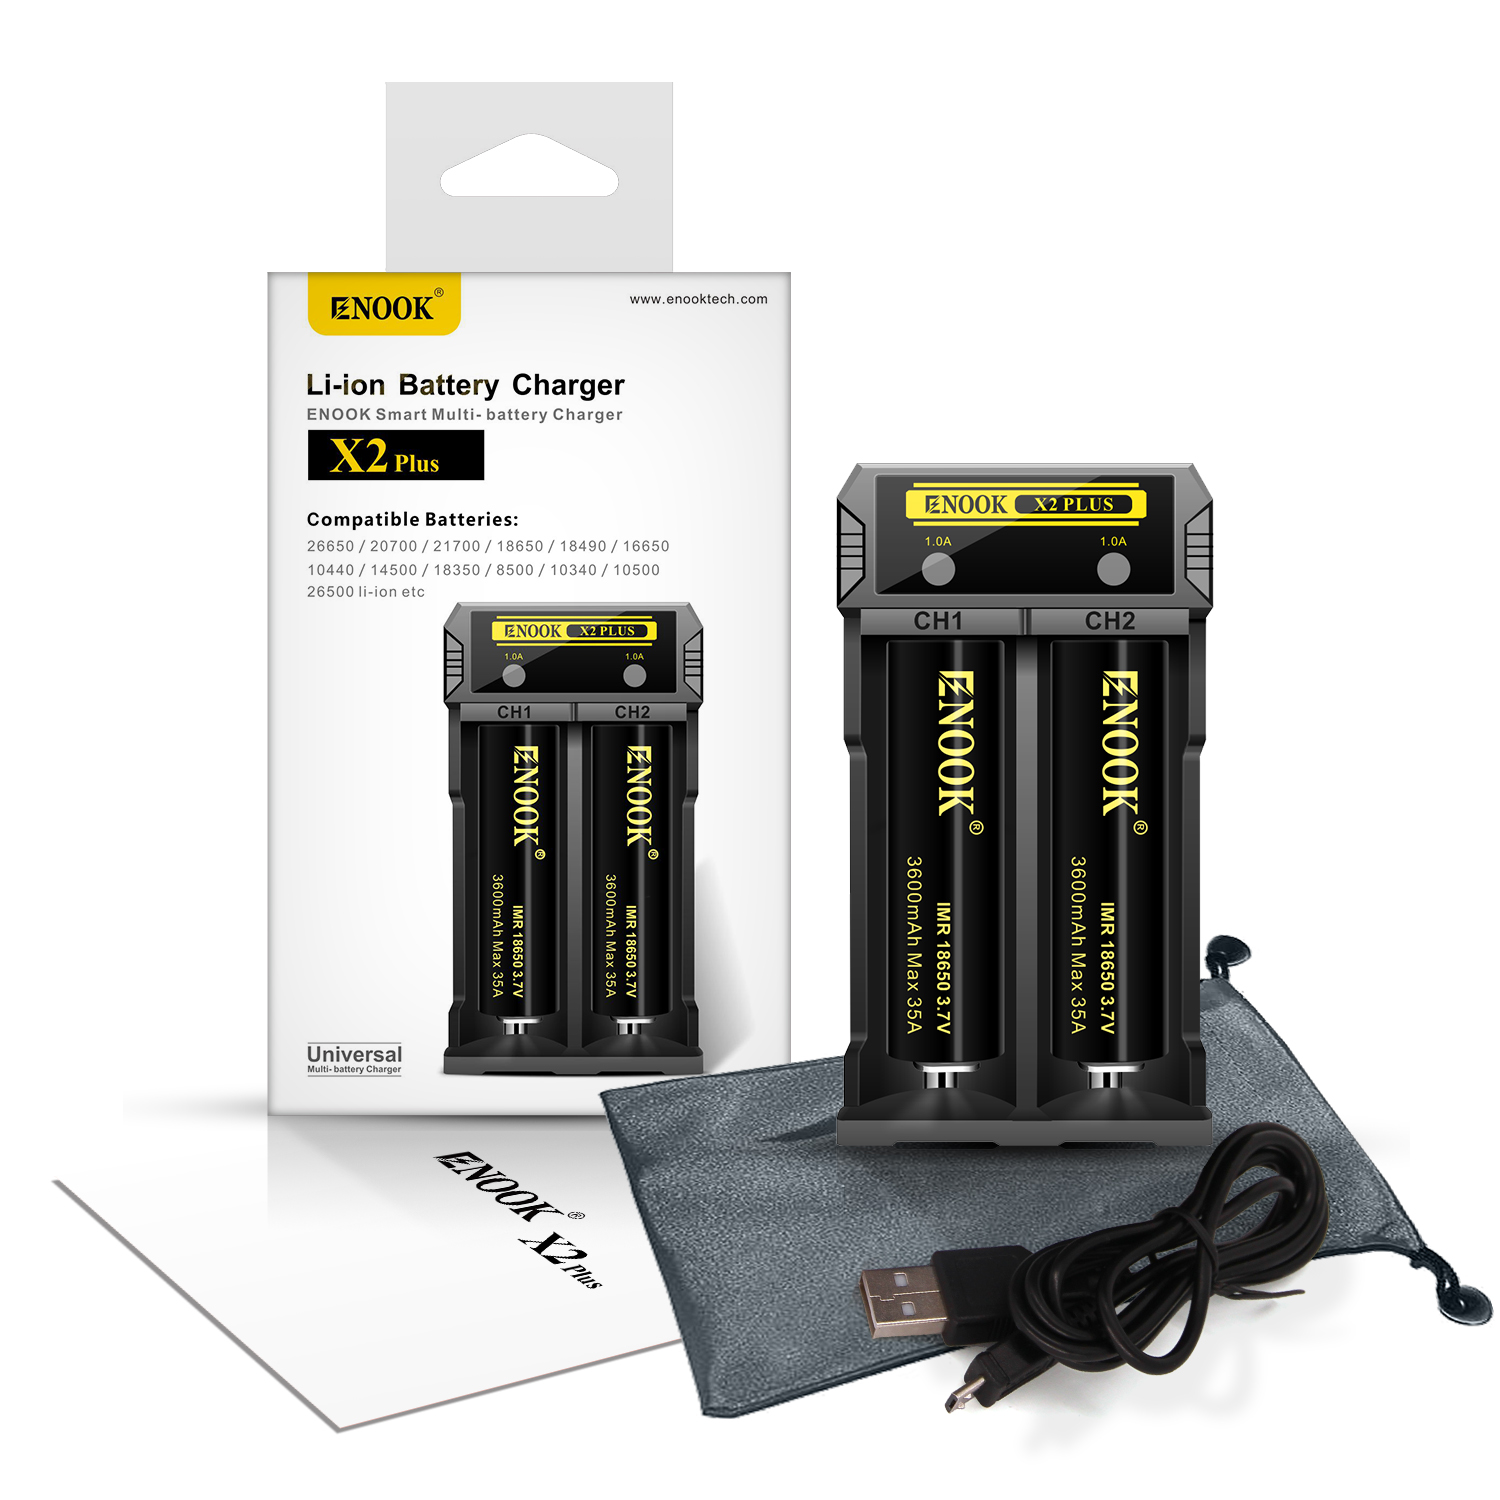 ENOOK X2 PLUS smart multi- battery charger